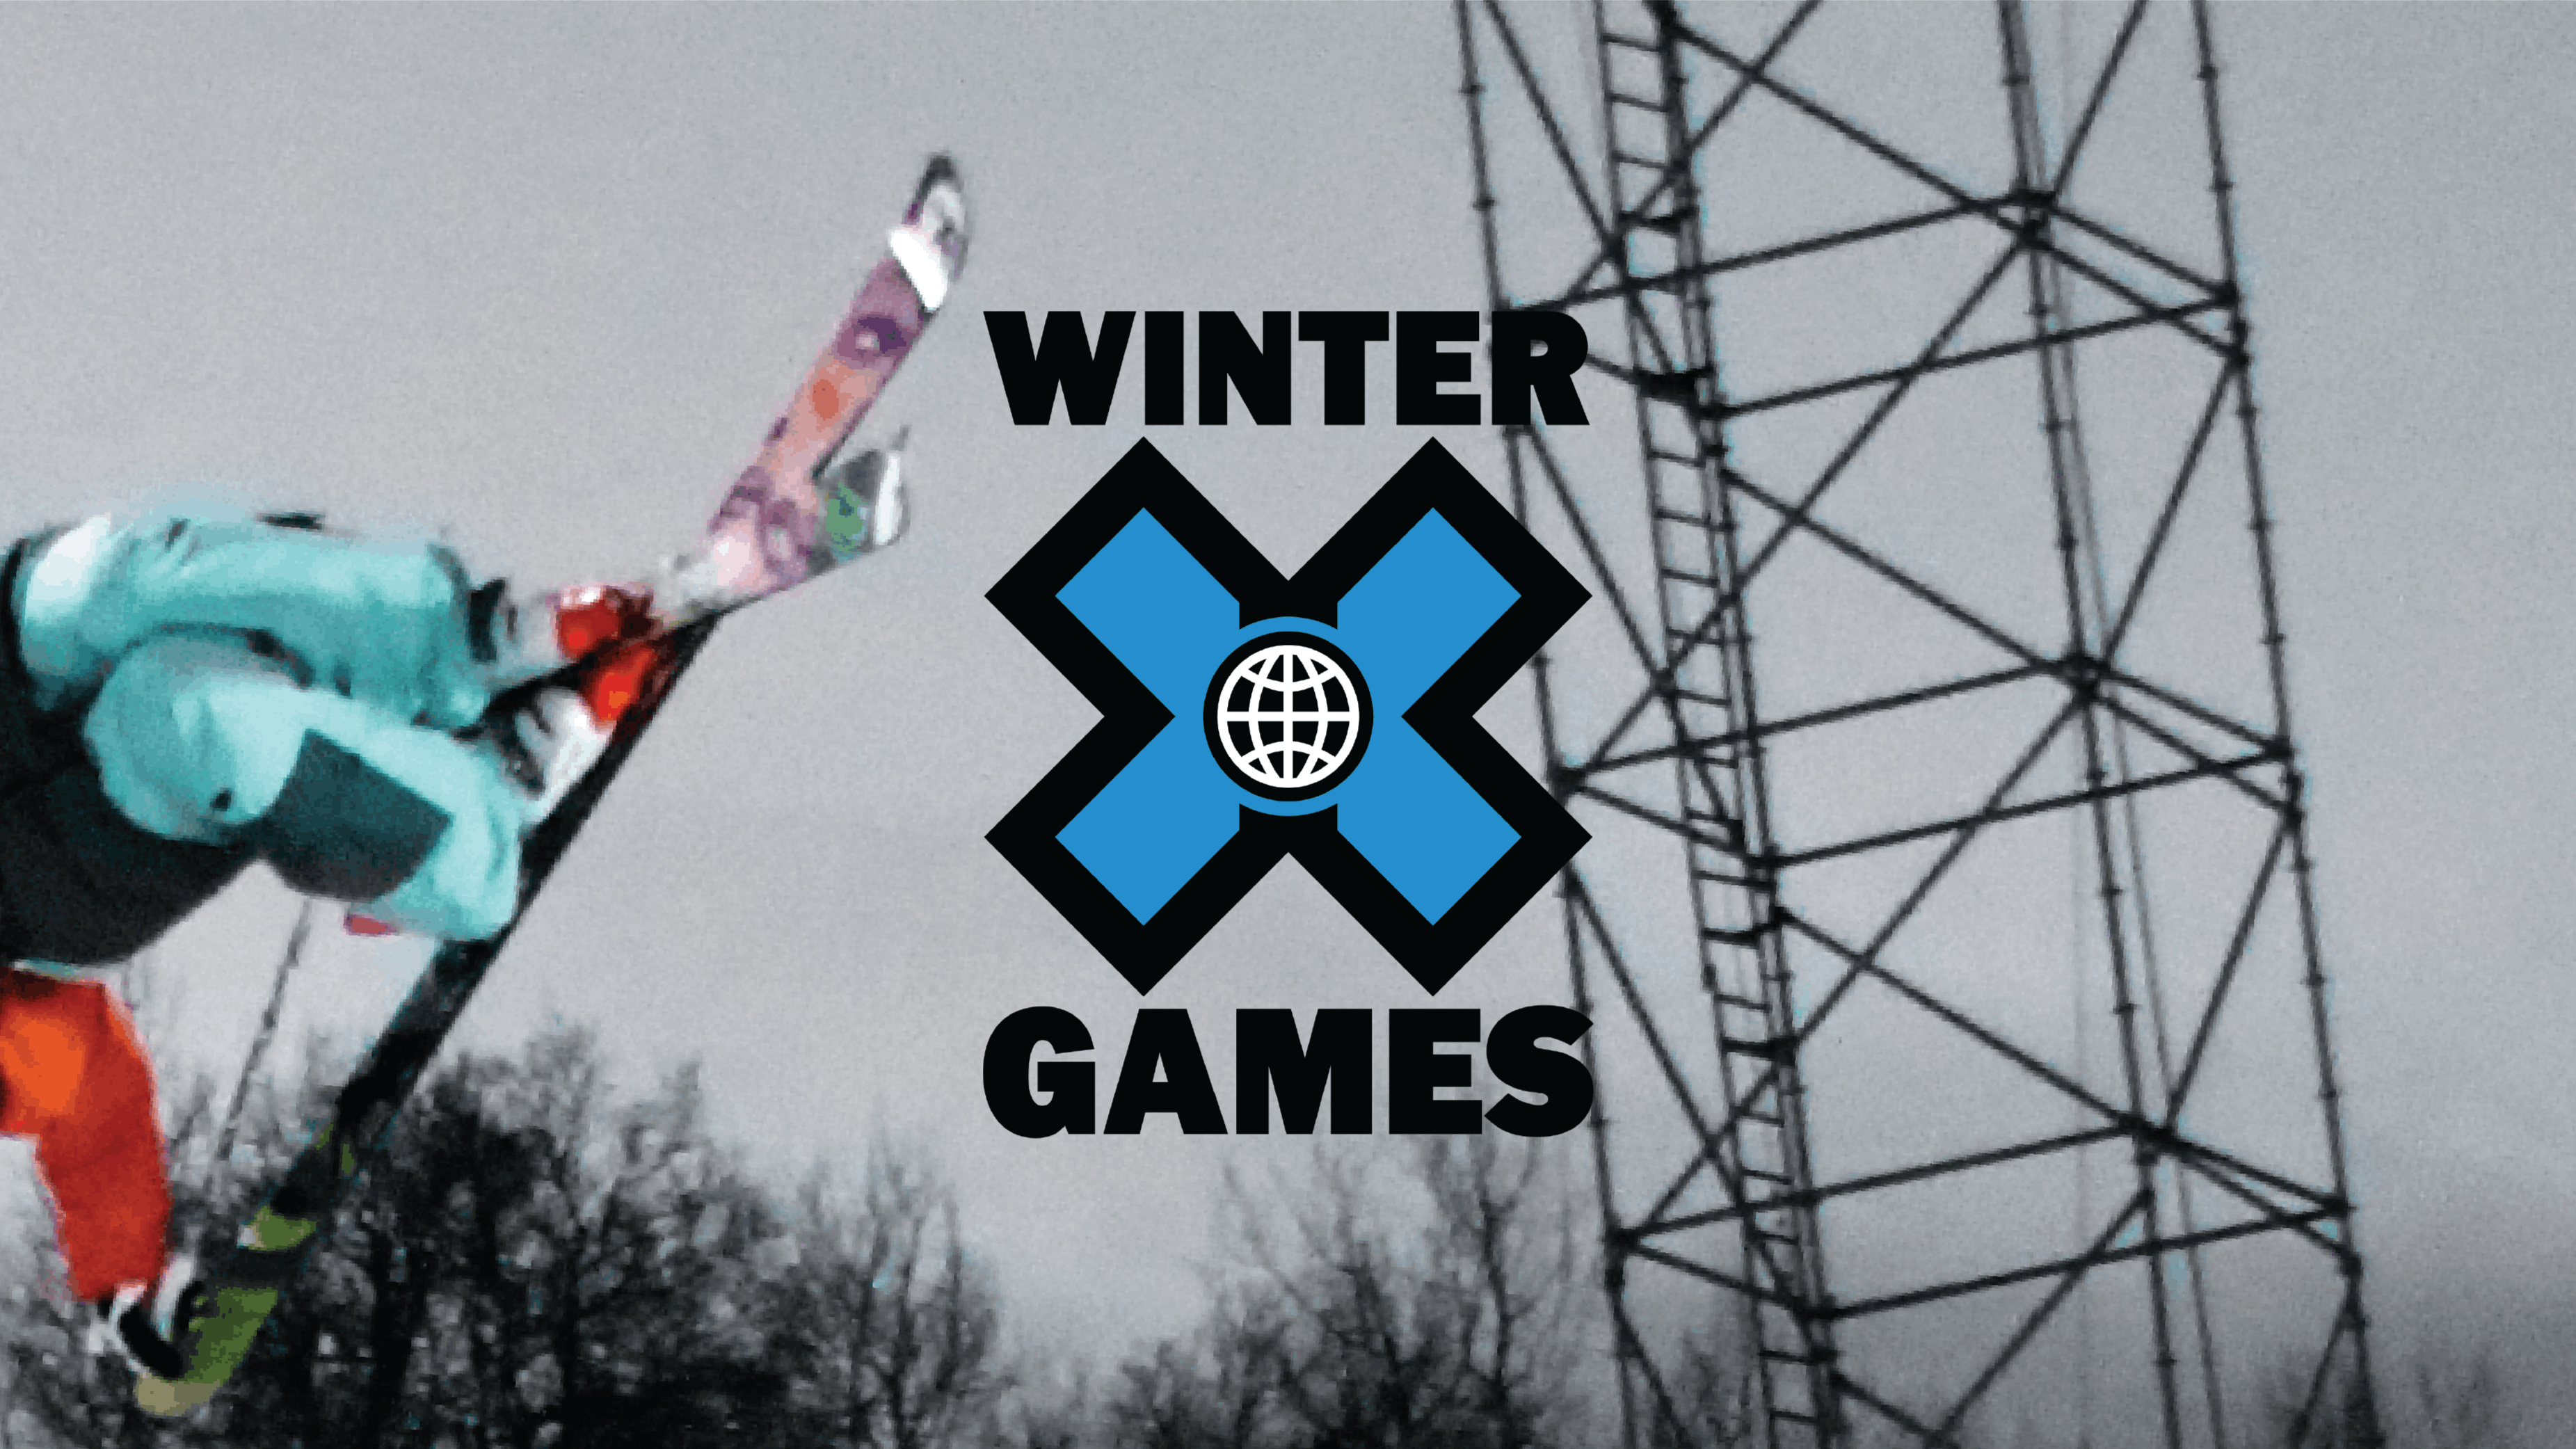 A skier jumps in the halfpipe at the Winter X Games. The Winter X Games logo is in the center of the image.